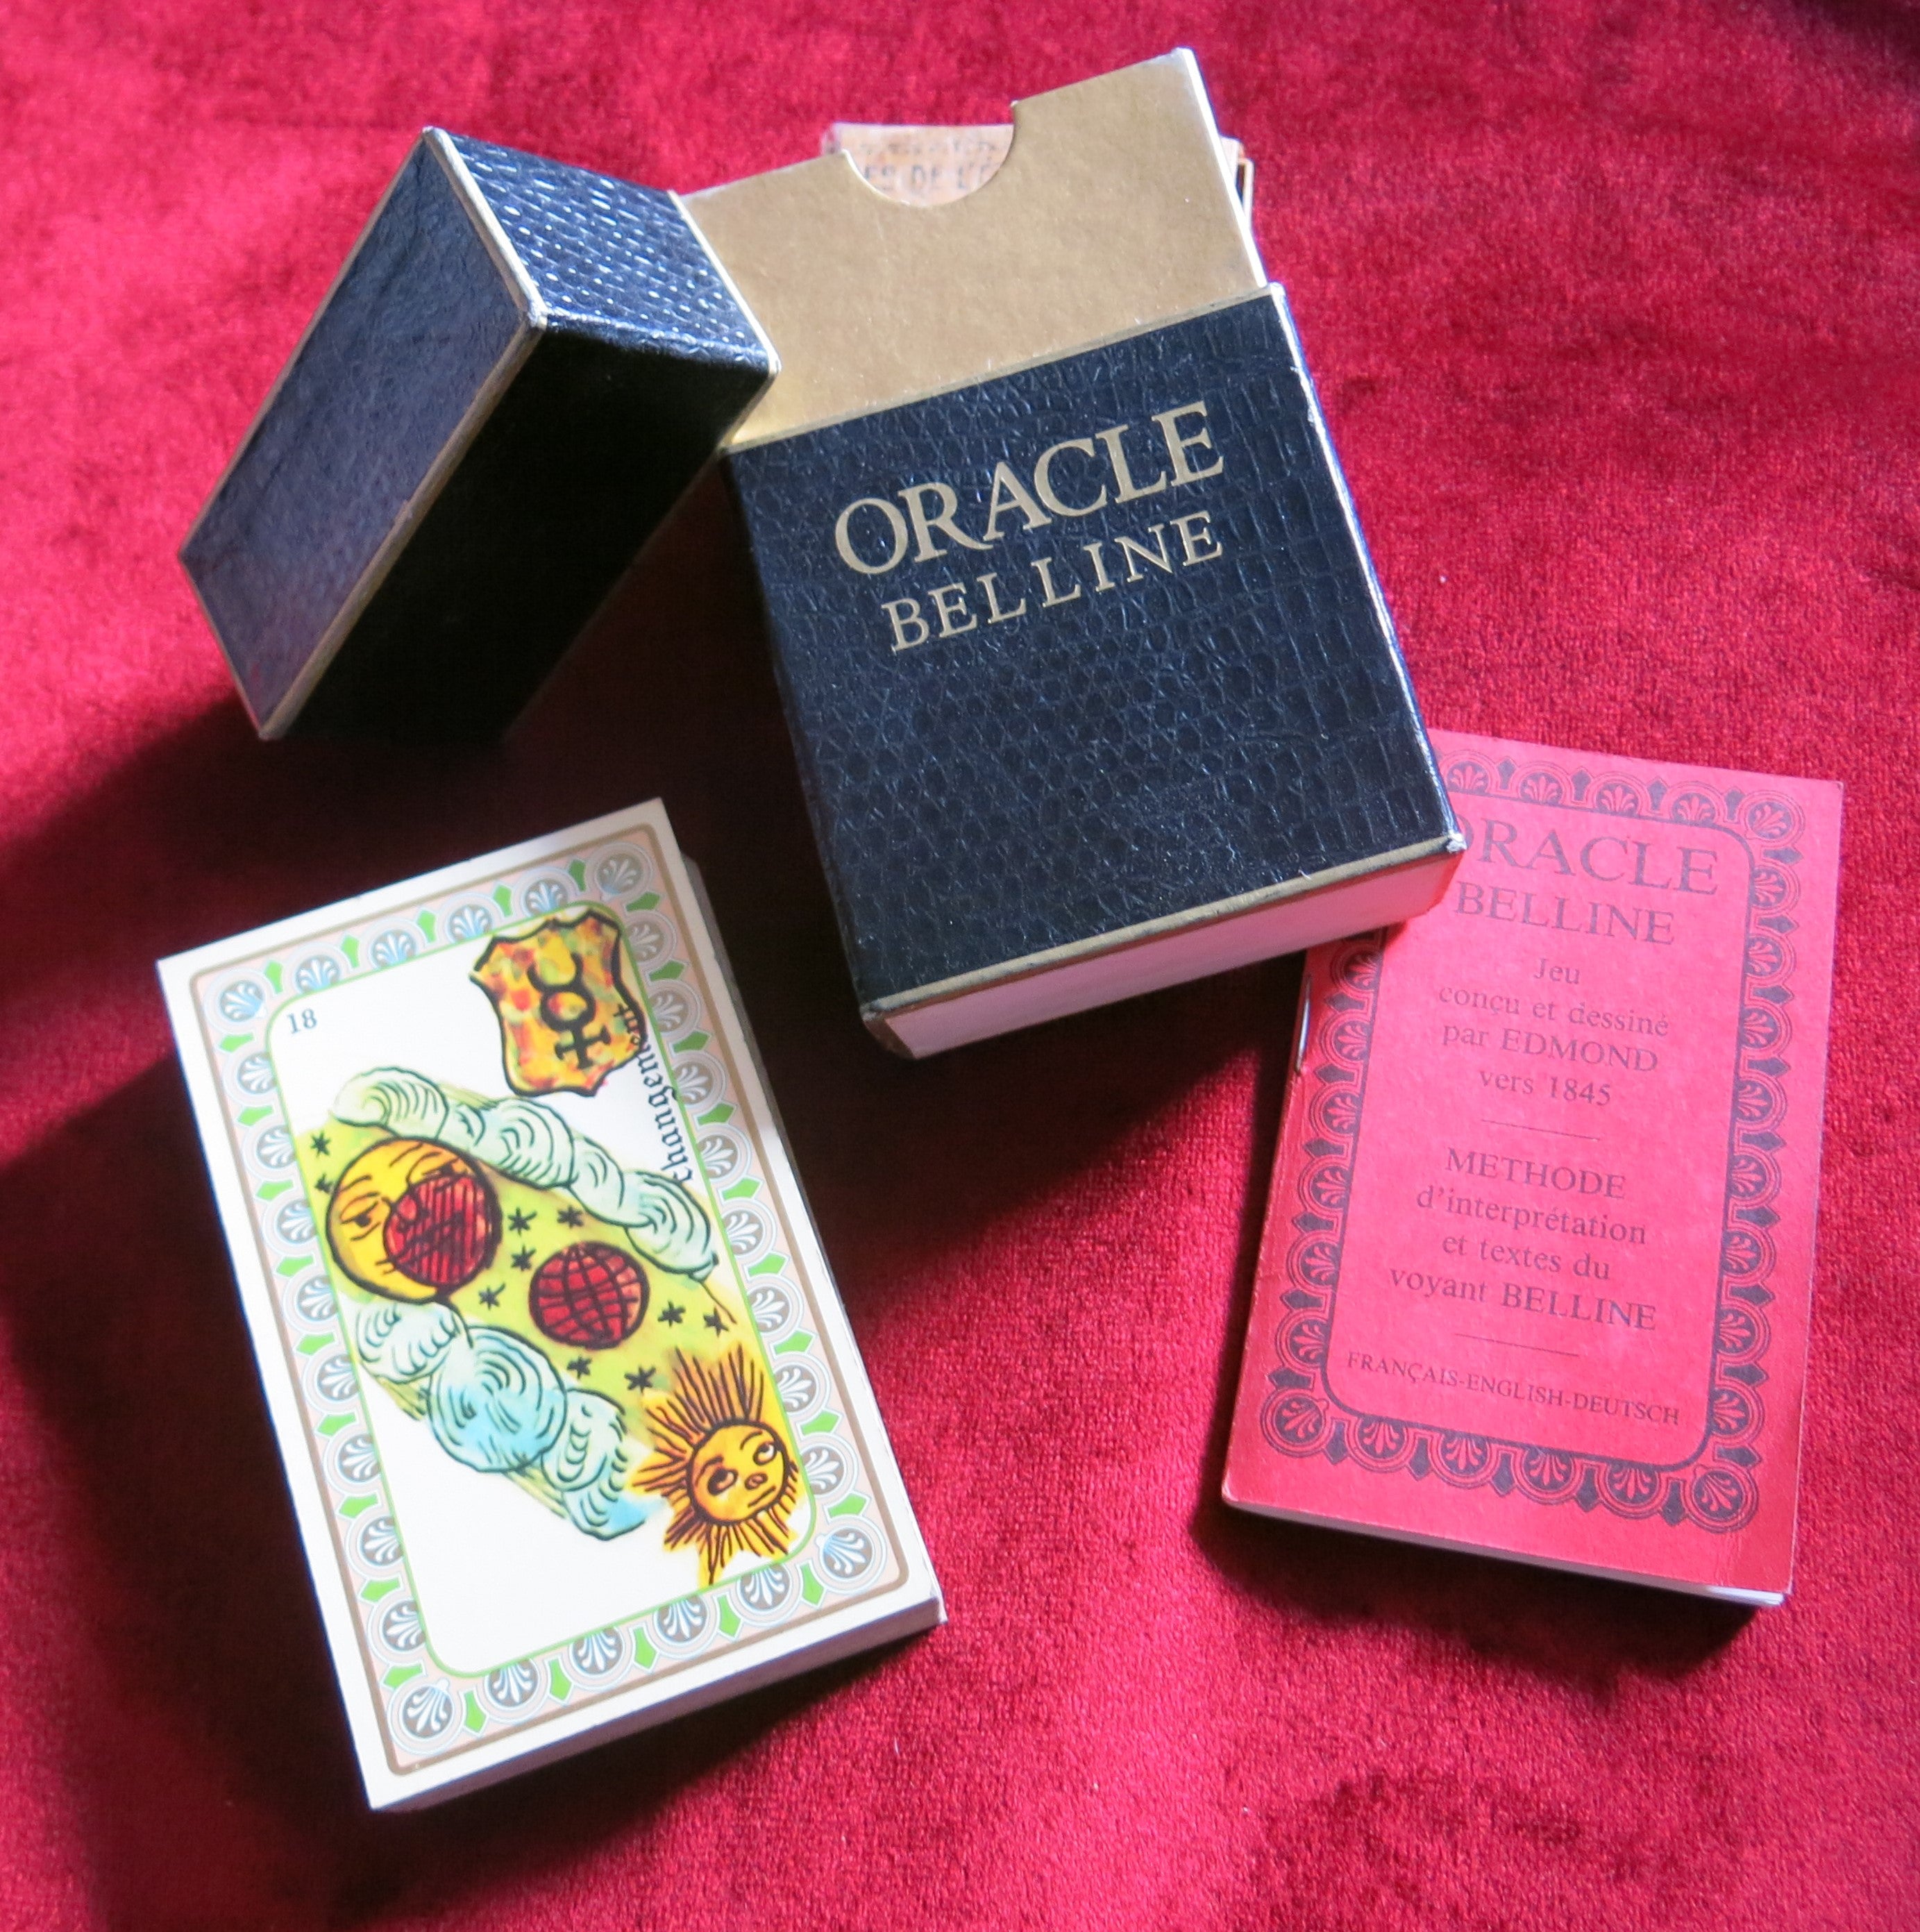 ORACLE BELLINE is a form of divination with tarot cards. It is a